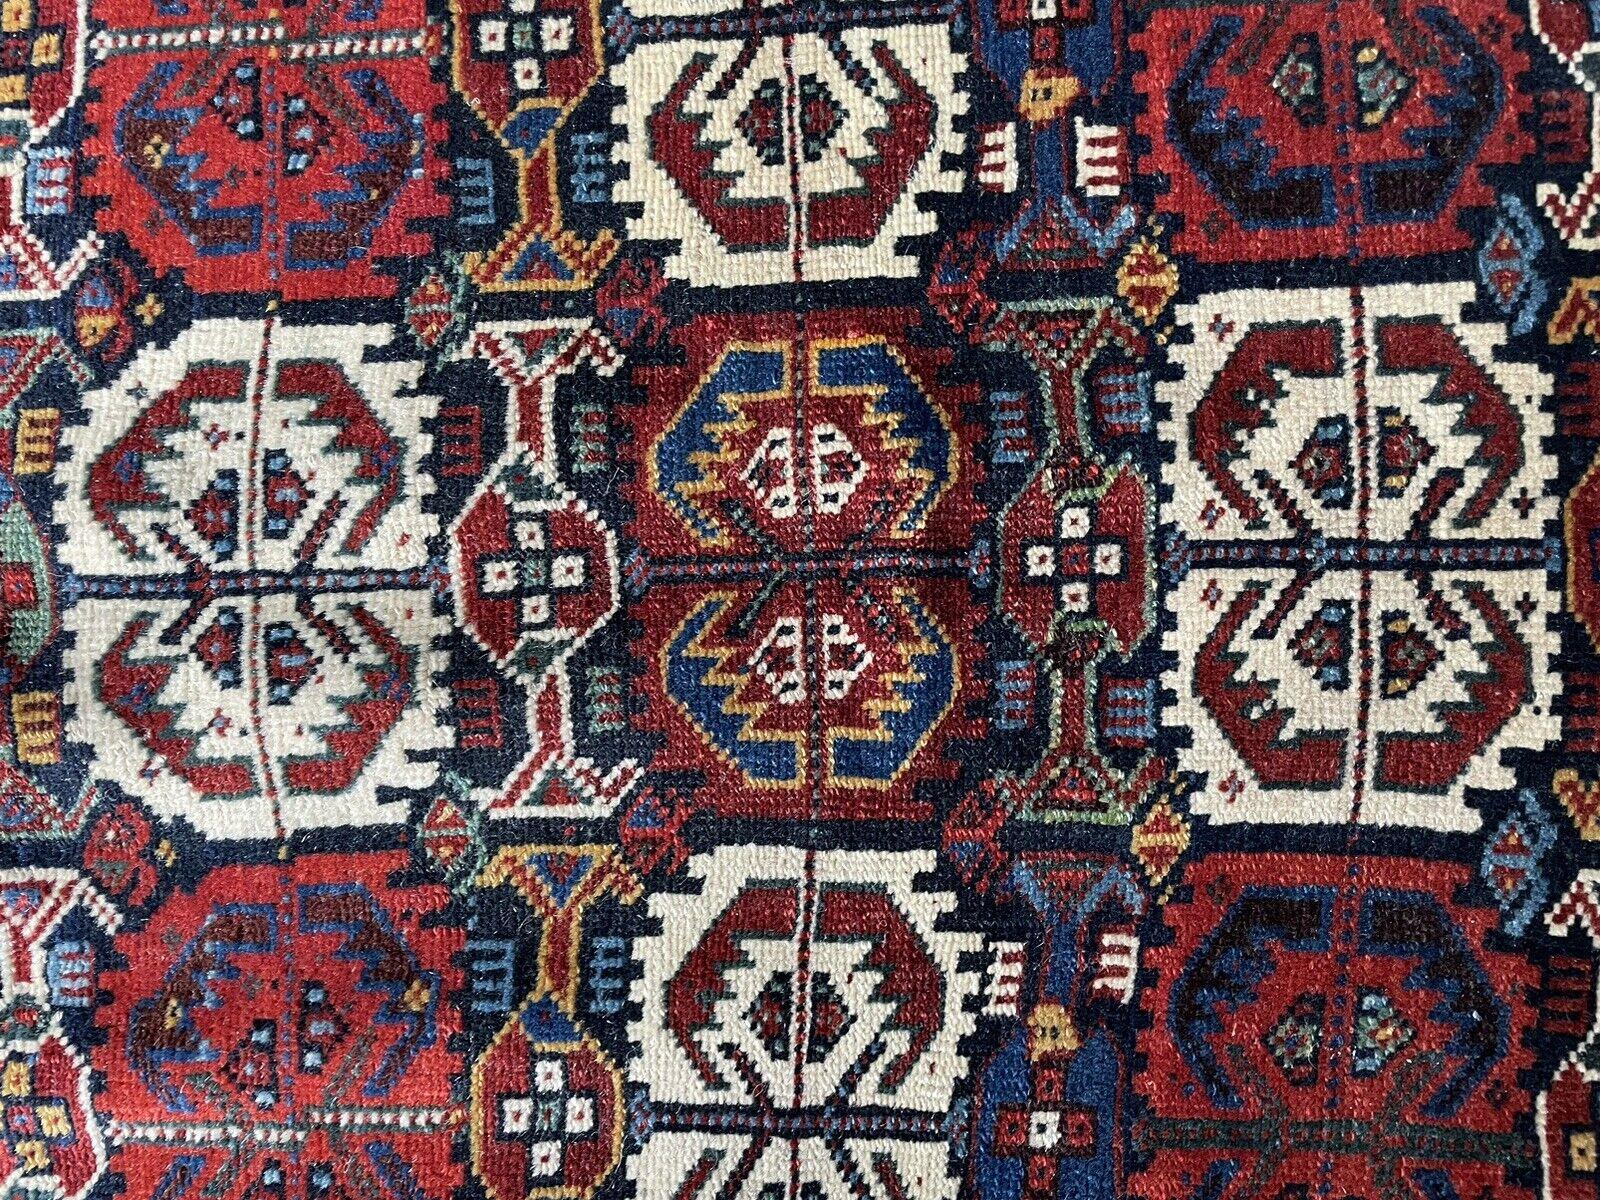 Elevate your collection with this Handmade Antique Persian Collectible Gashkai Bagface, crafted in the 1880s. Measuring 2.2' x 2.7' (70cm x 83cm), this exquisite piece showcases the intricate artistry and vibrant colors typical of Gashkai